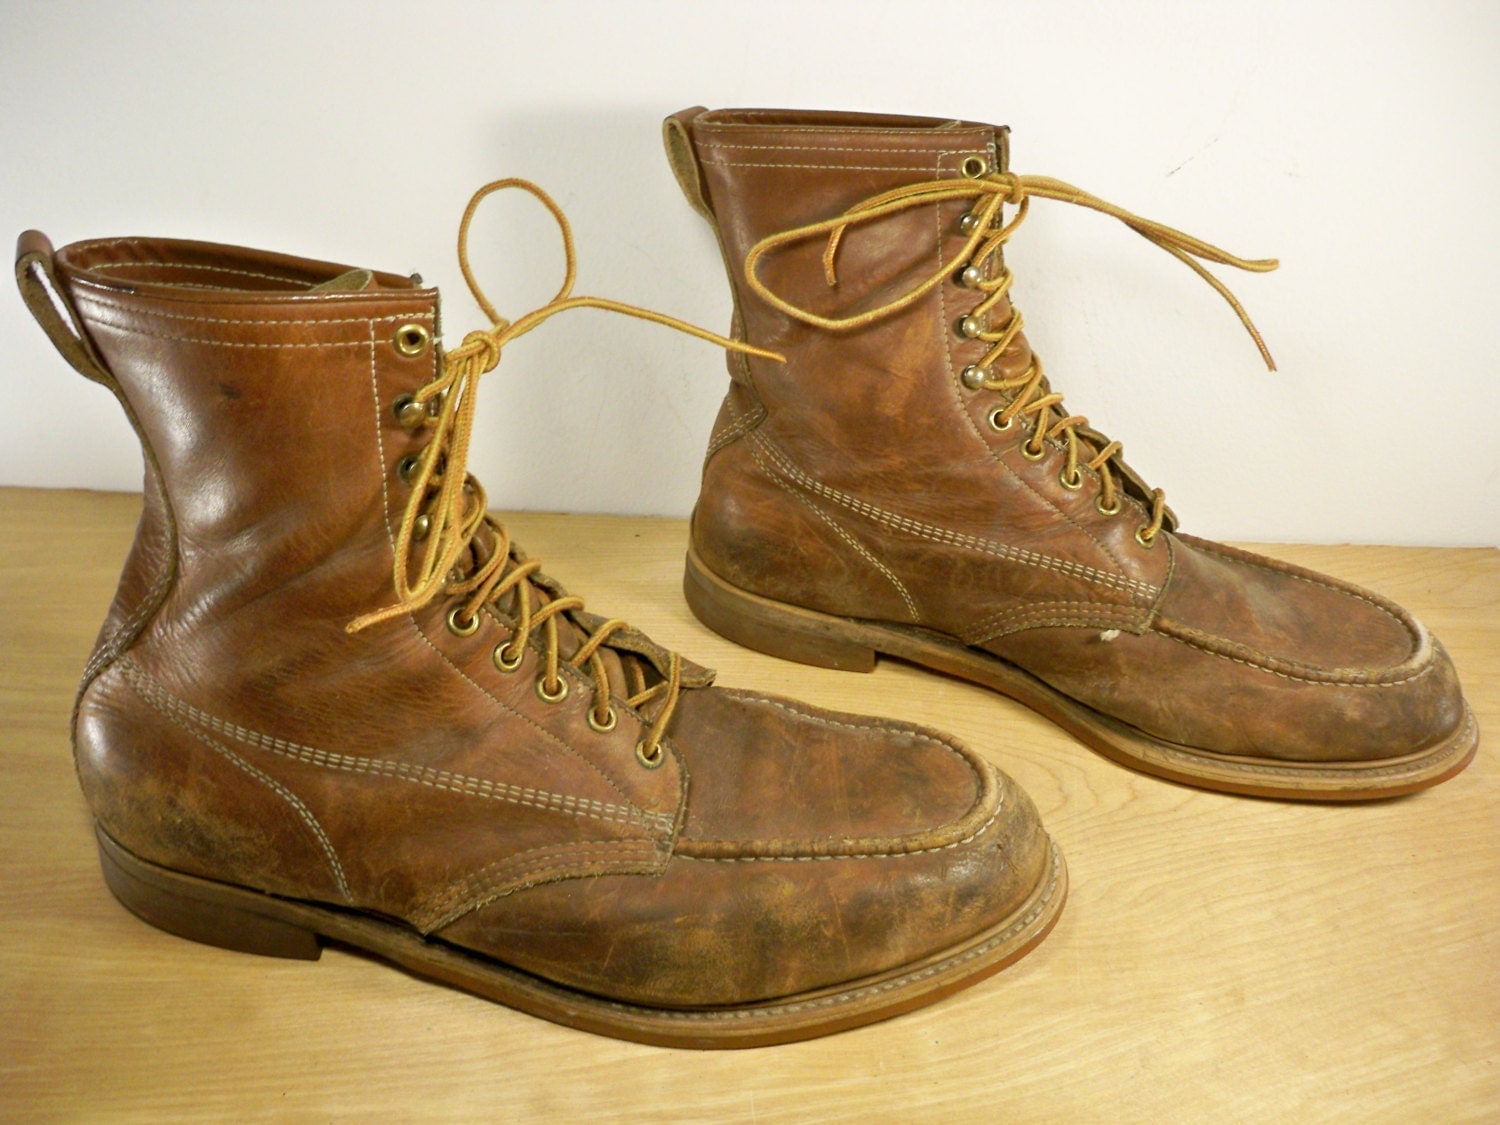 Vintage MASON SHOES Made in USA Work Non-Steel Toe by Joeymest